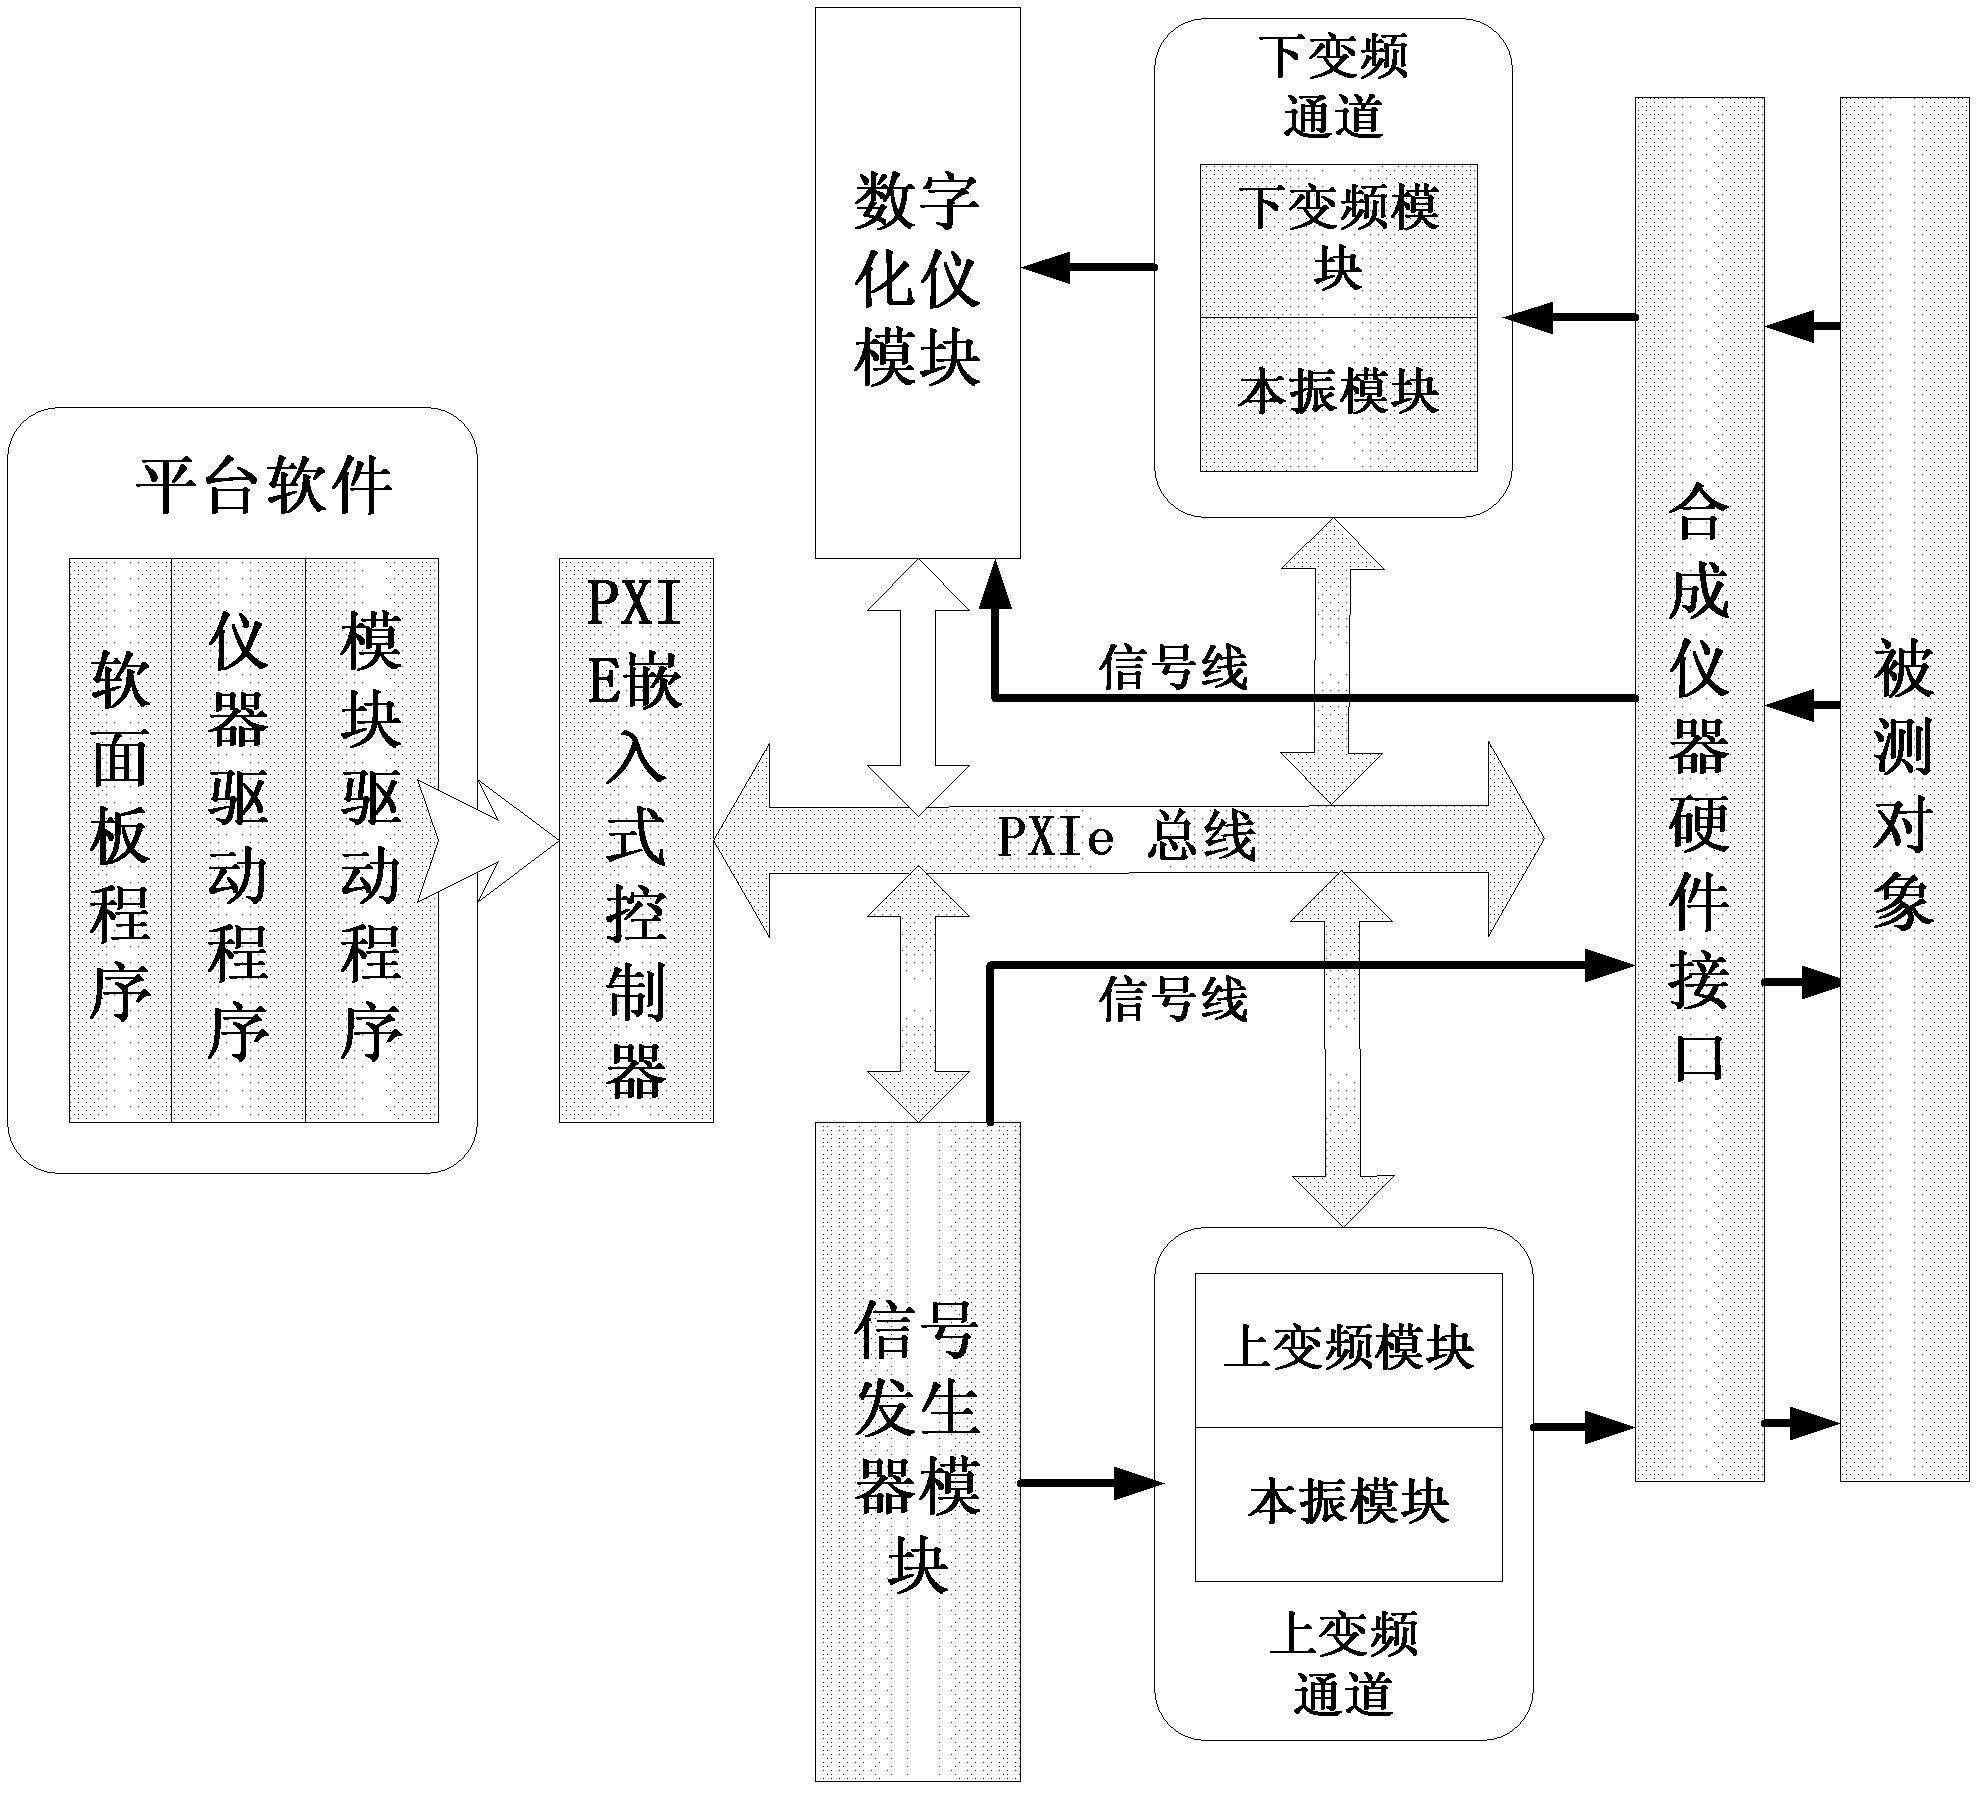 Radio frequency and microwave synthetic instrument based on PXIe (PCI Extensions for Instrumentation) synthetic instrument architecture